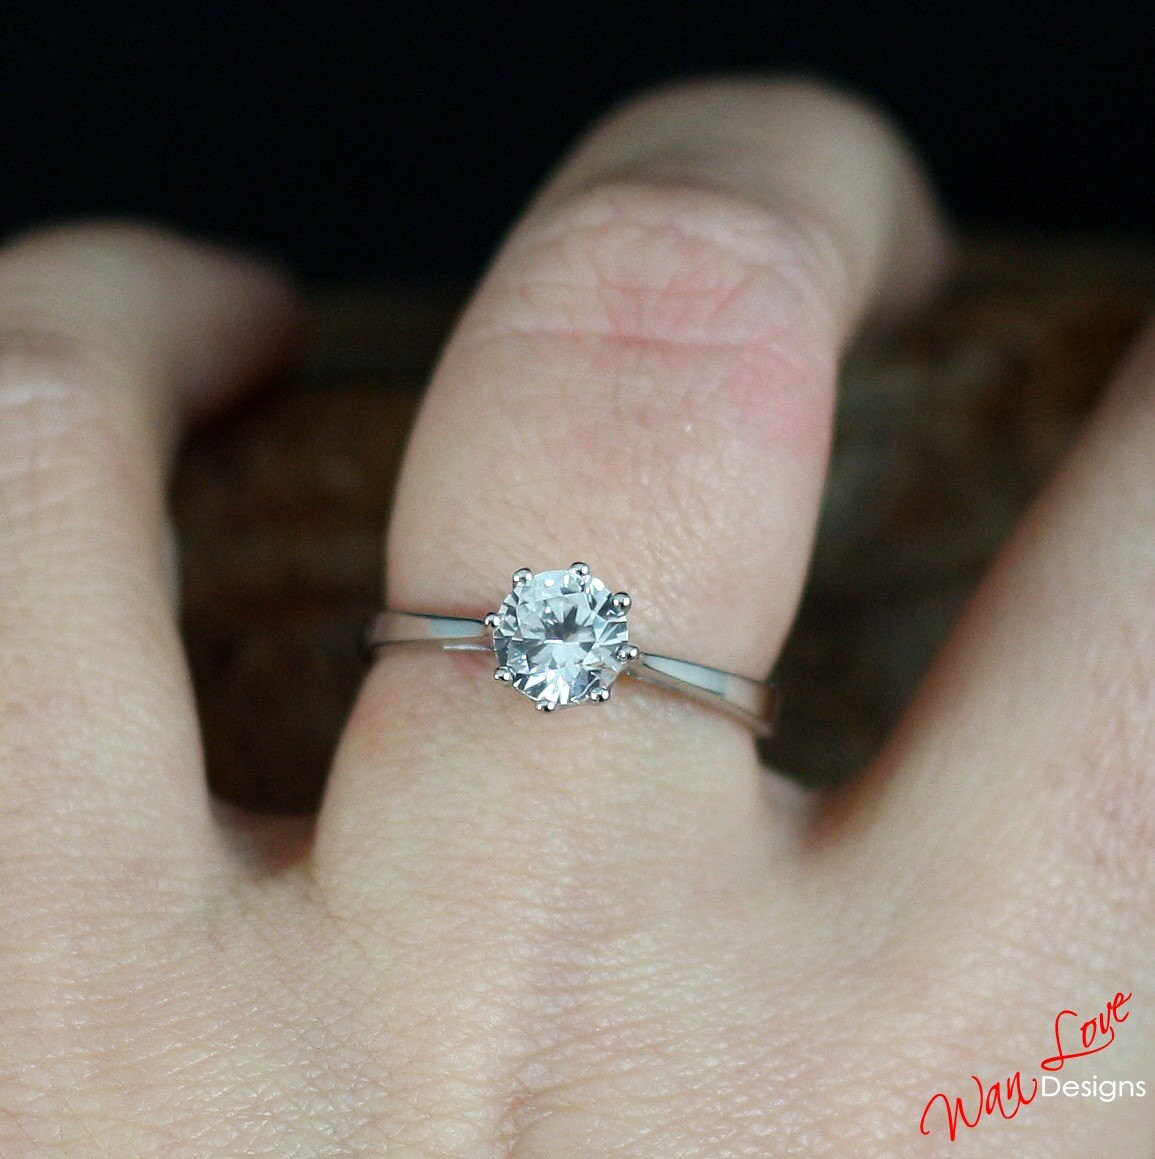 Sample Sale Ready to ship-White Sapphire Engagement Ring, Solitaire, 8 prong Cathedral Round,1ct,6mm,Silver Rhodium-Wedding-Anniversary Gift Wan Love Designs